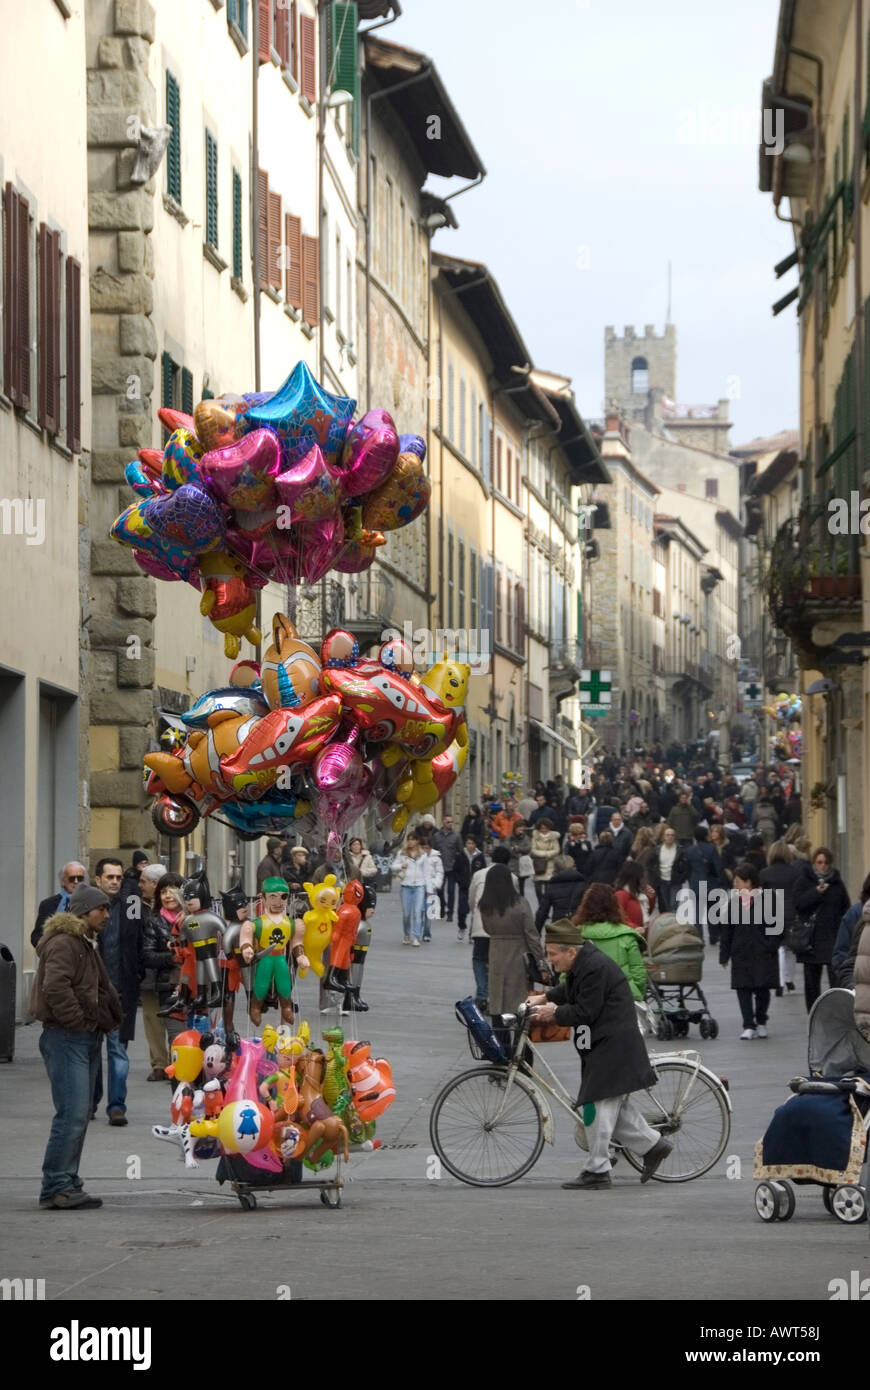 Balloon seller and old man wheels a bicycle across the evening passeggiata in Corso Italia the main shopping street of Arezzo Stock Photo